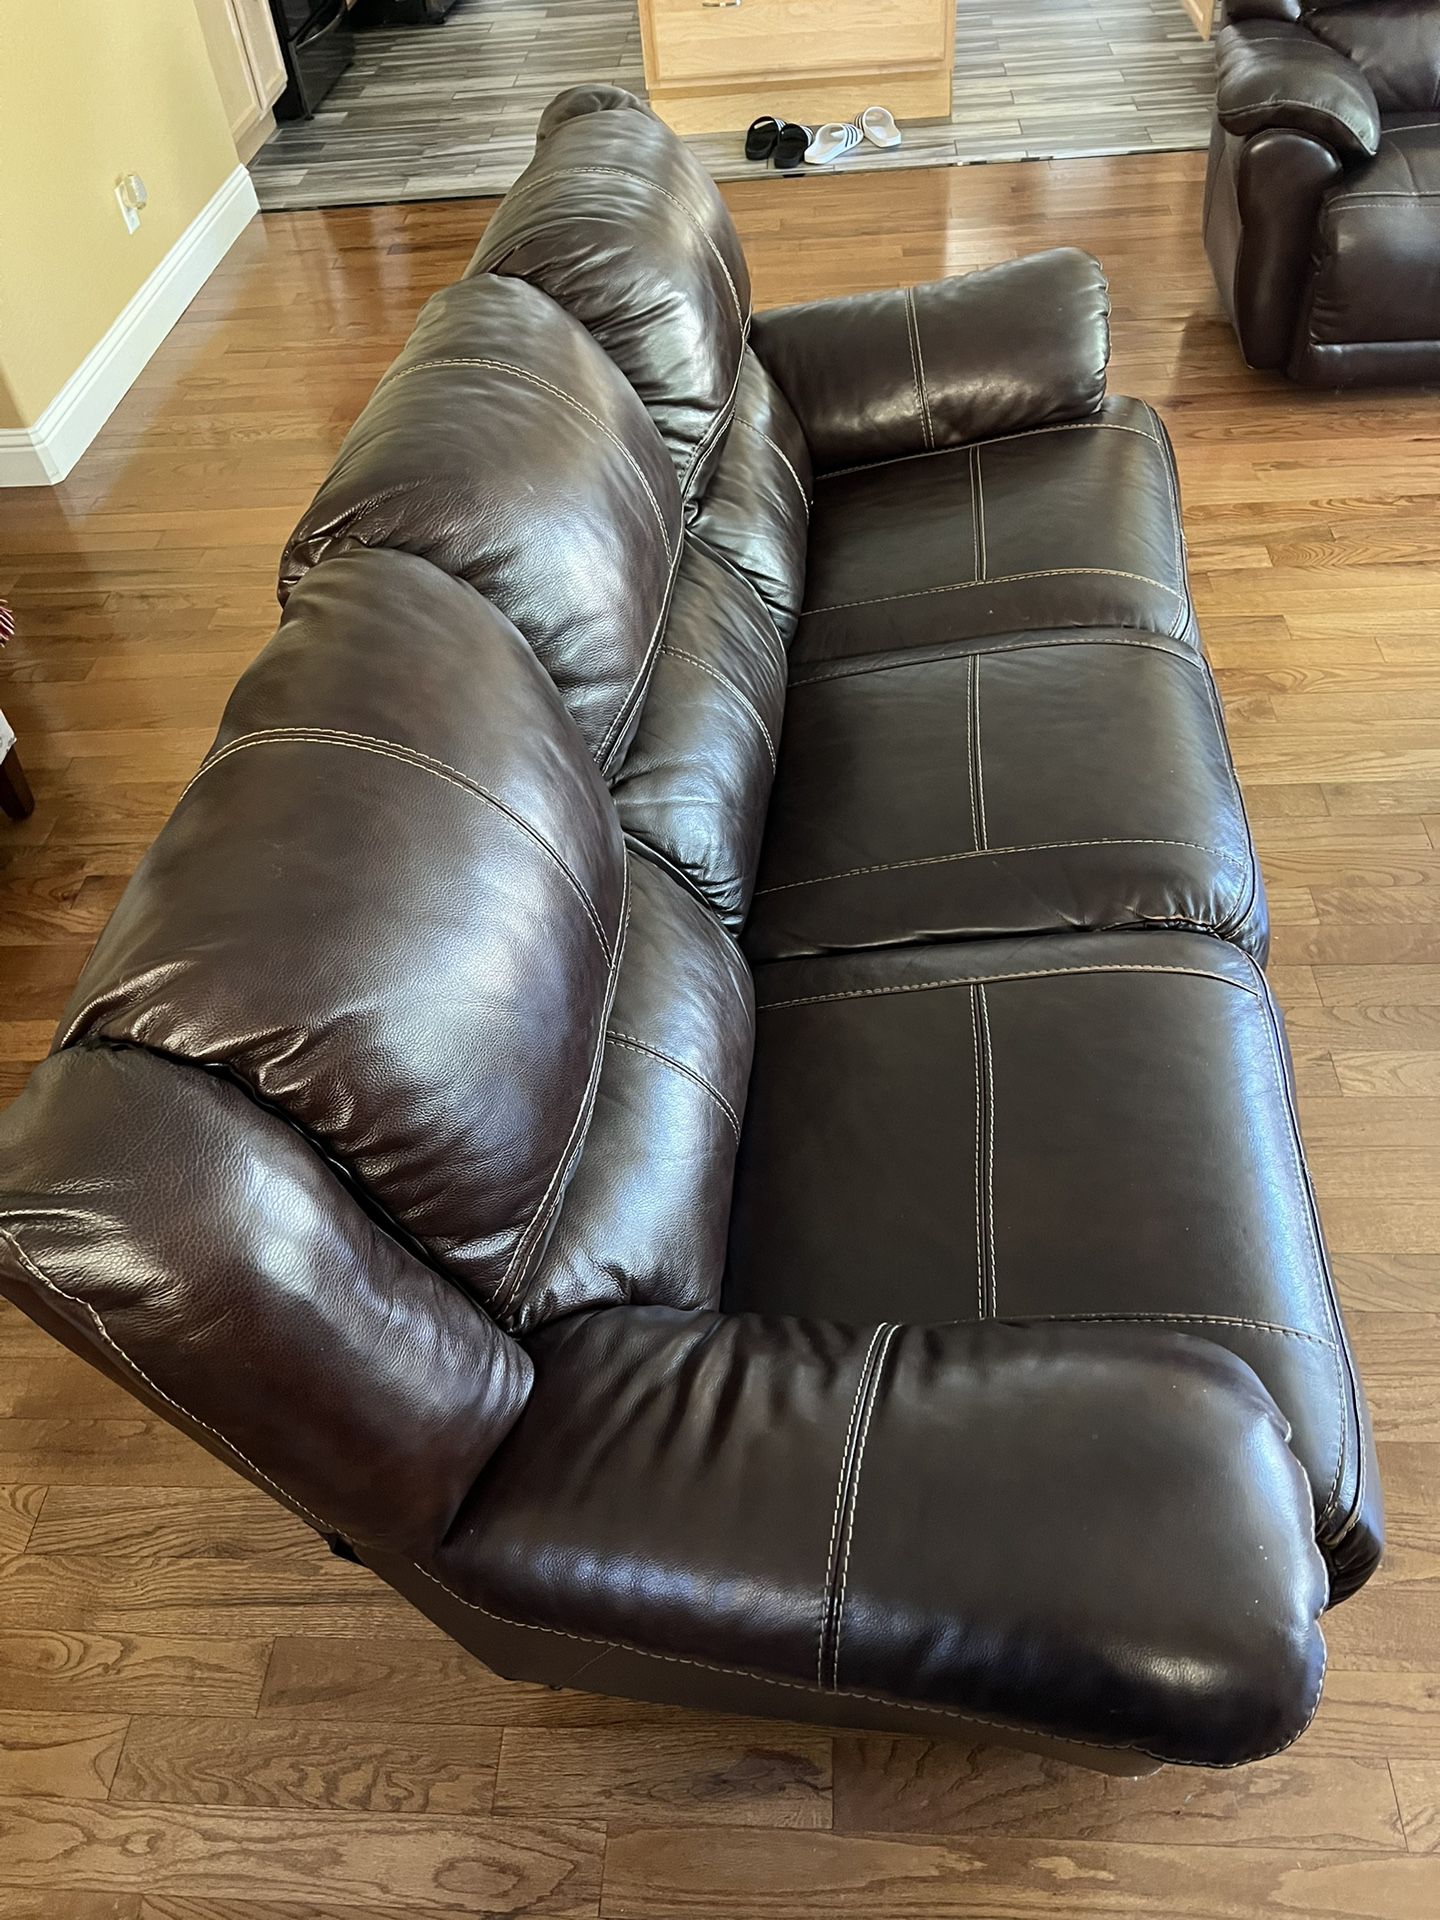 3 Couches -   Brown Leather 2 Sofa And Loveseat  Power Recliner 